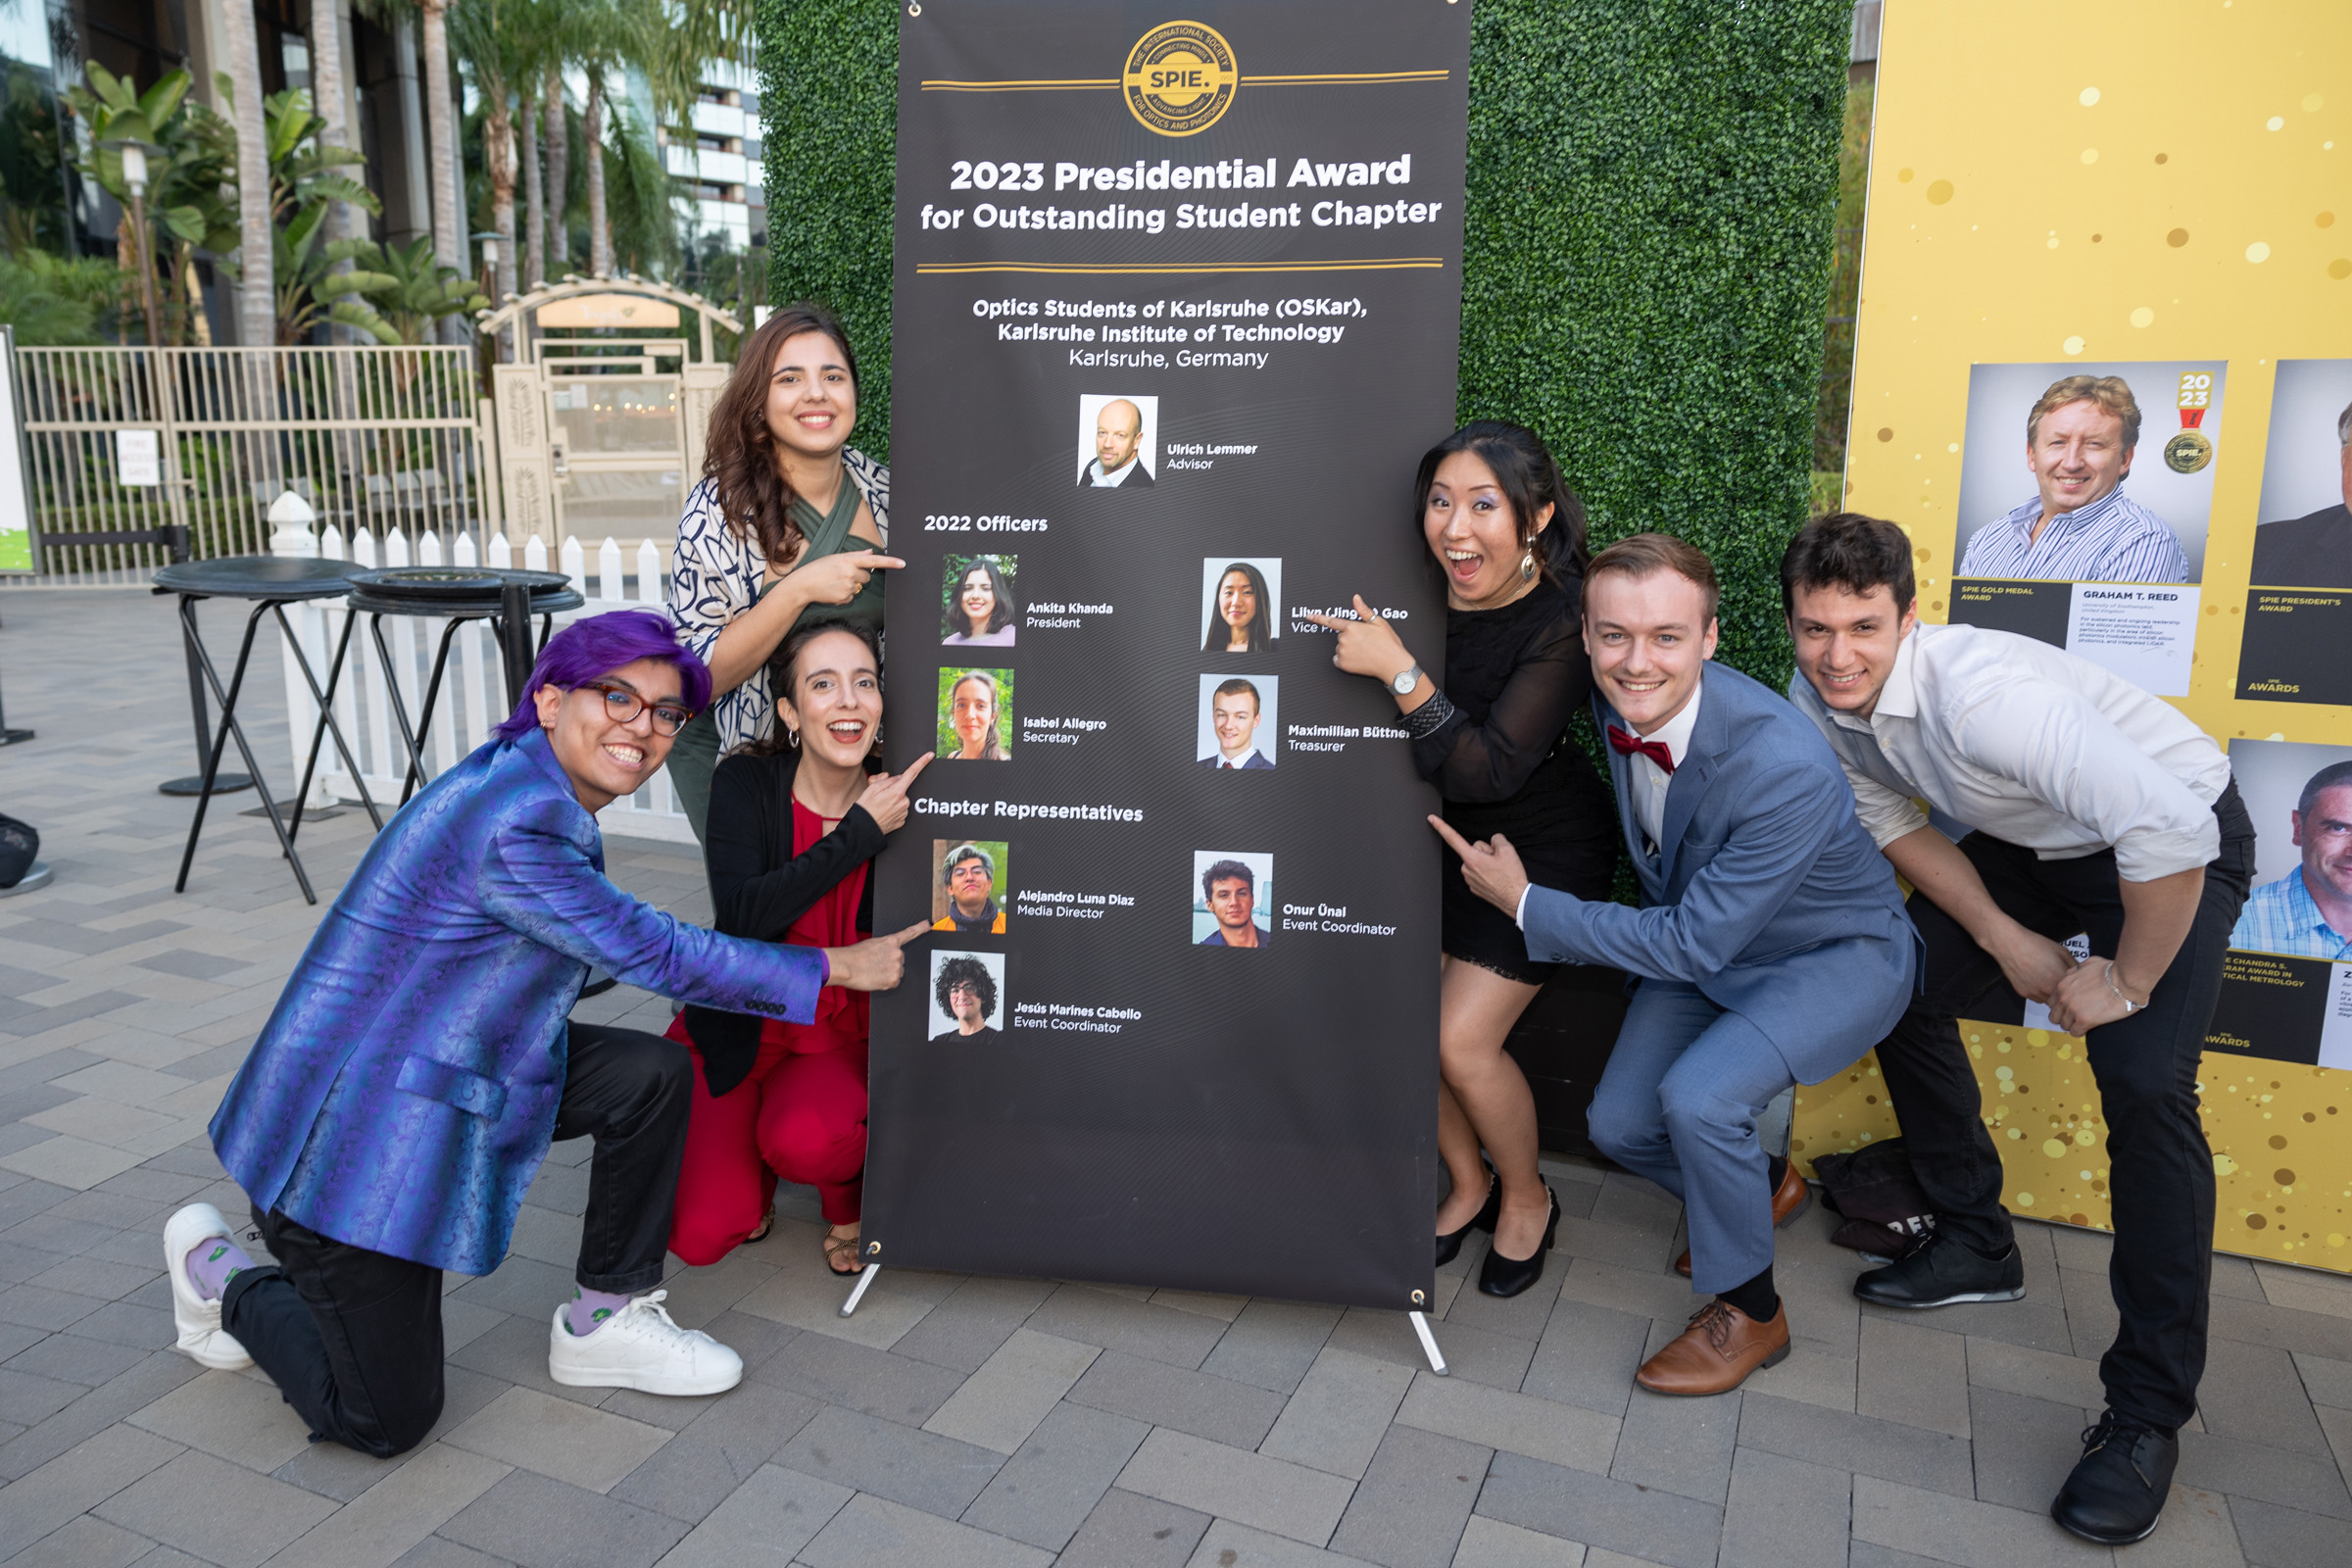 2023 SPIE Presidential Award for Outstanding Student Chapter recipients at awards ceremony